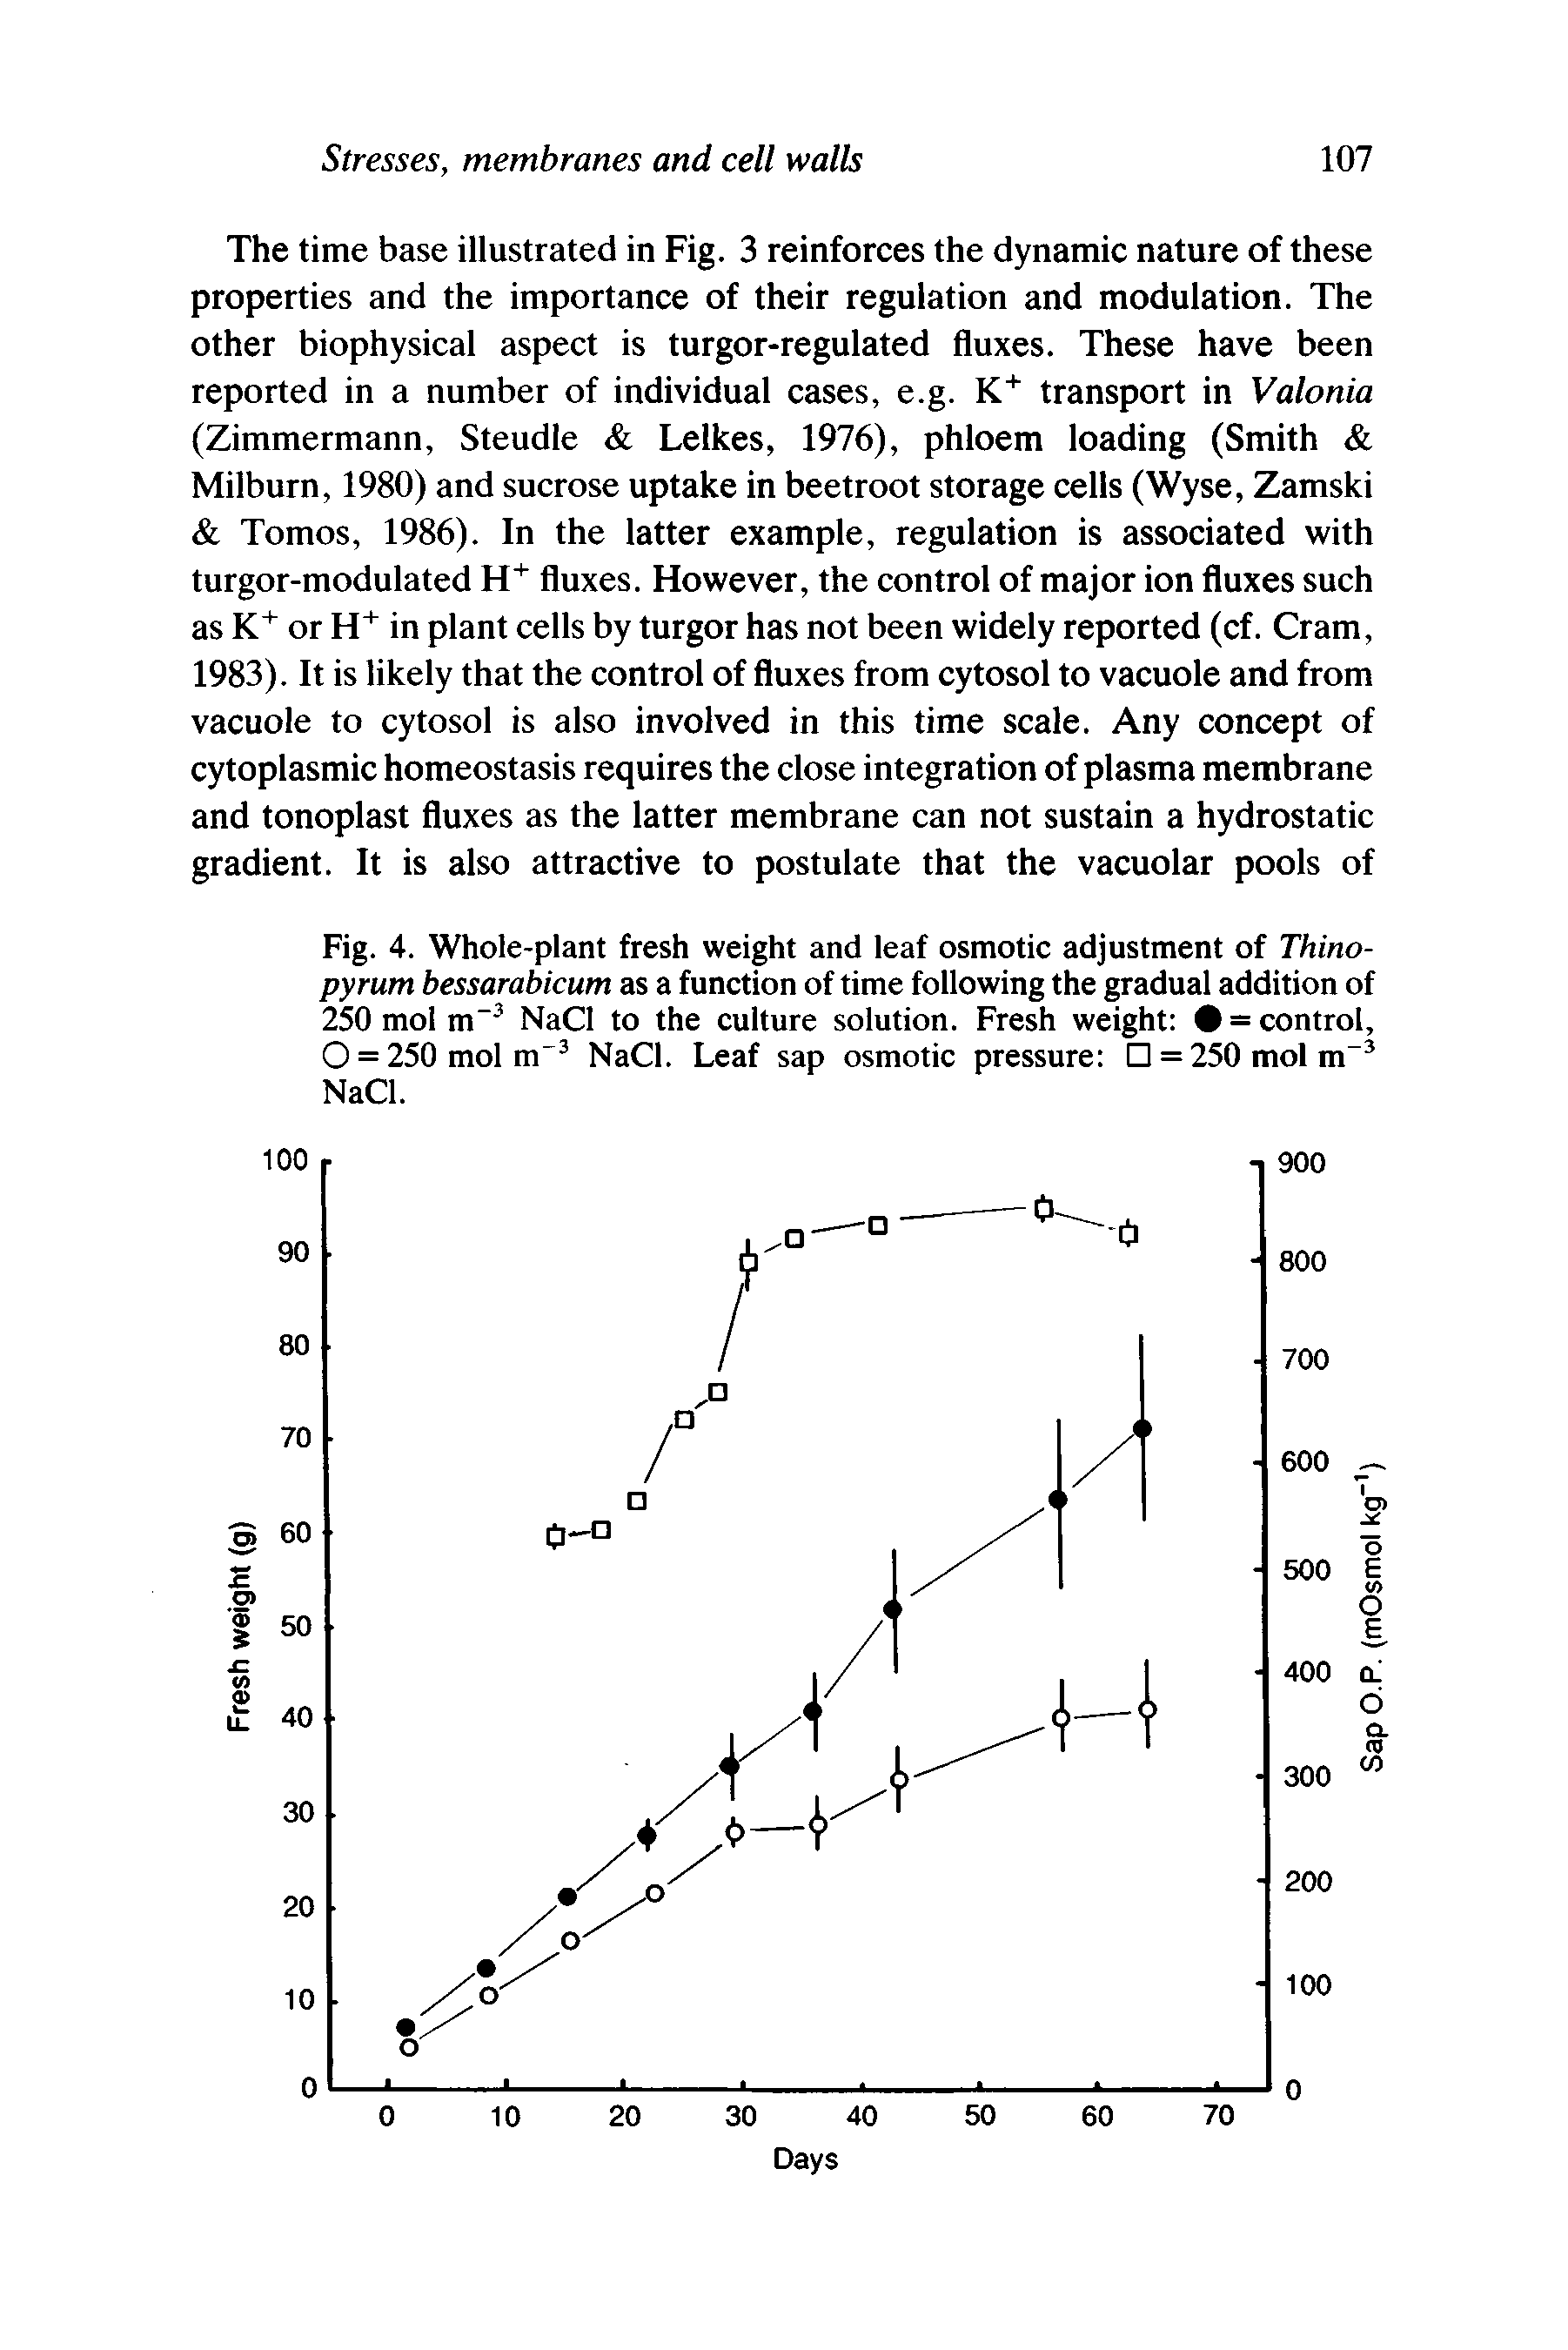 Fig. 4. Whole-plant fresh weight and leaf osmotic adjustment of Thino-pyrum bessarabicum as a function of time following the gradual addition of 250 mol m NaCl to the culture solution. Fresh weight = control, O = 250 mol m NaCl. Leaf sap osmotic pressure = 250molm NaCl.